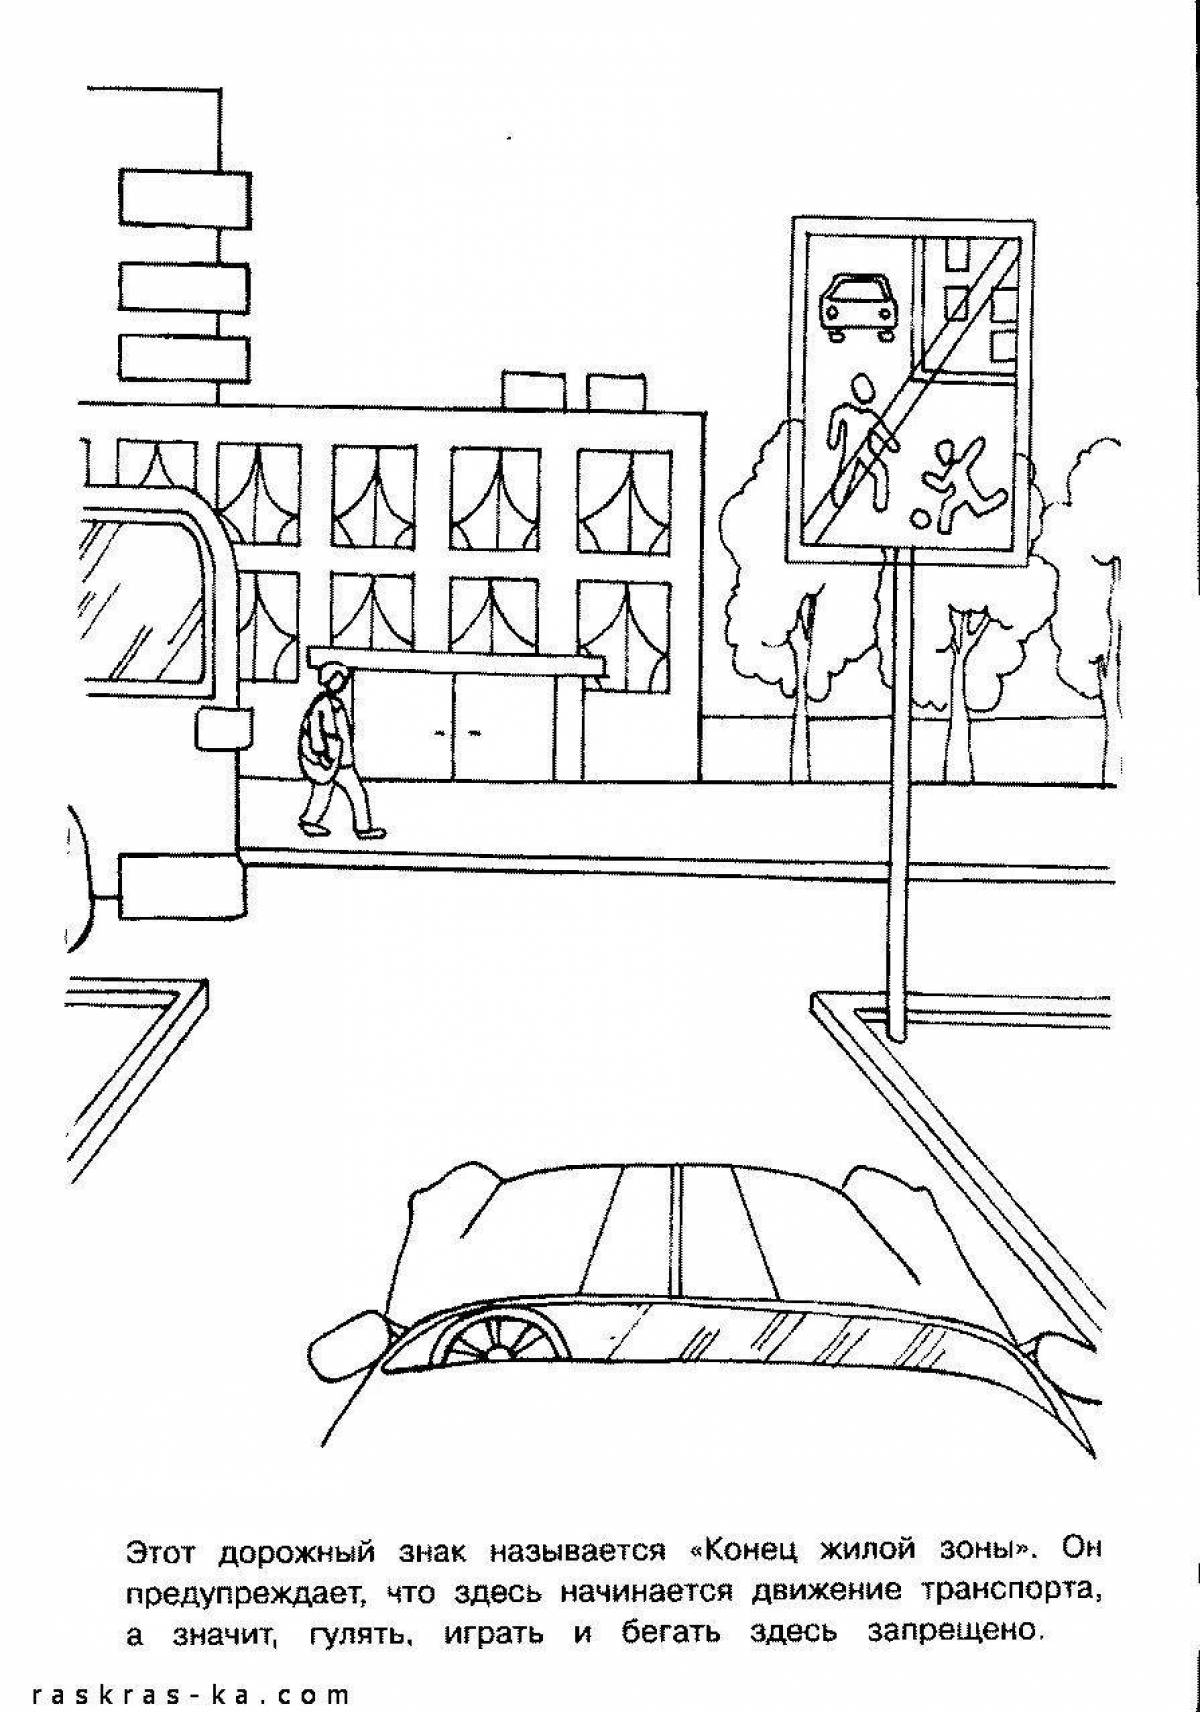 Cute 1st grade traffic rules coloring page